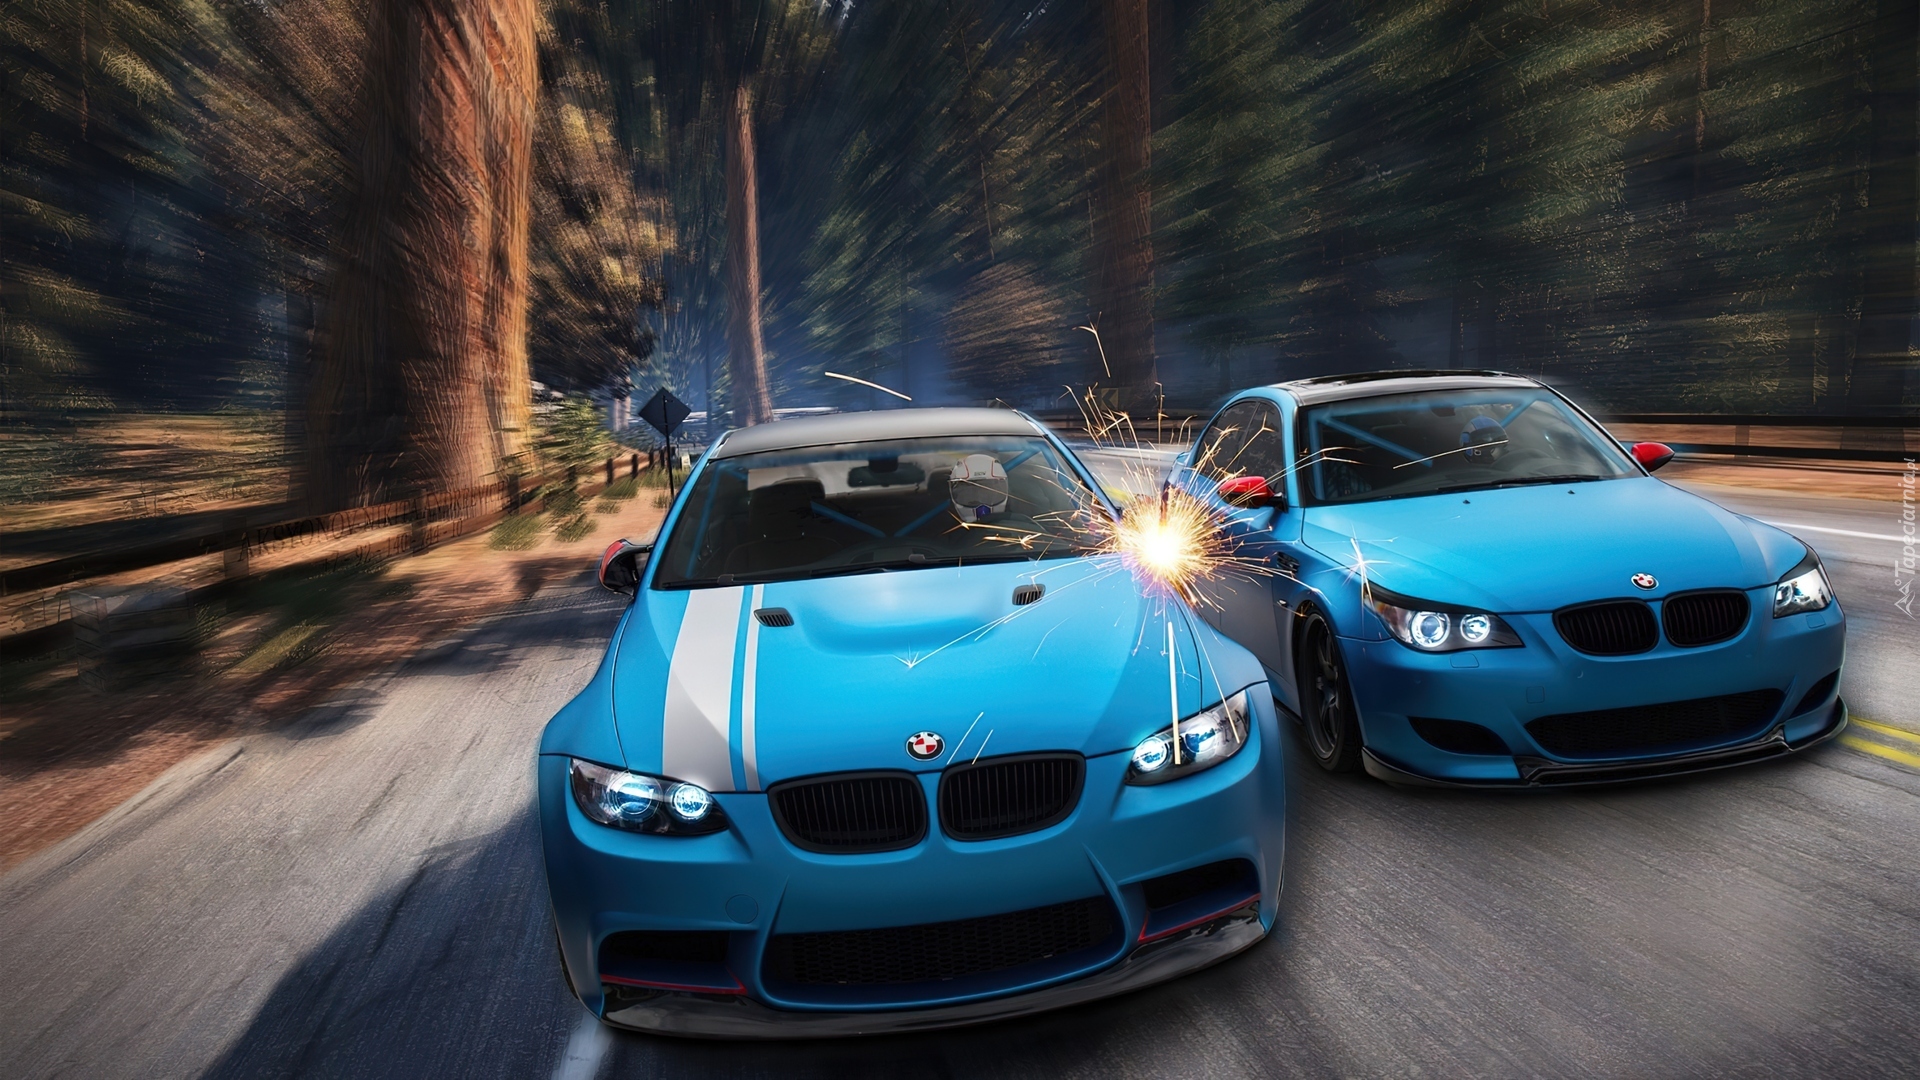 Bmw M3, M5, Gra, Need For Speed, Pursuit